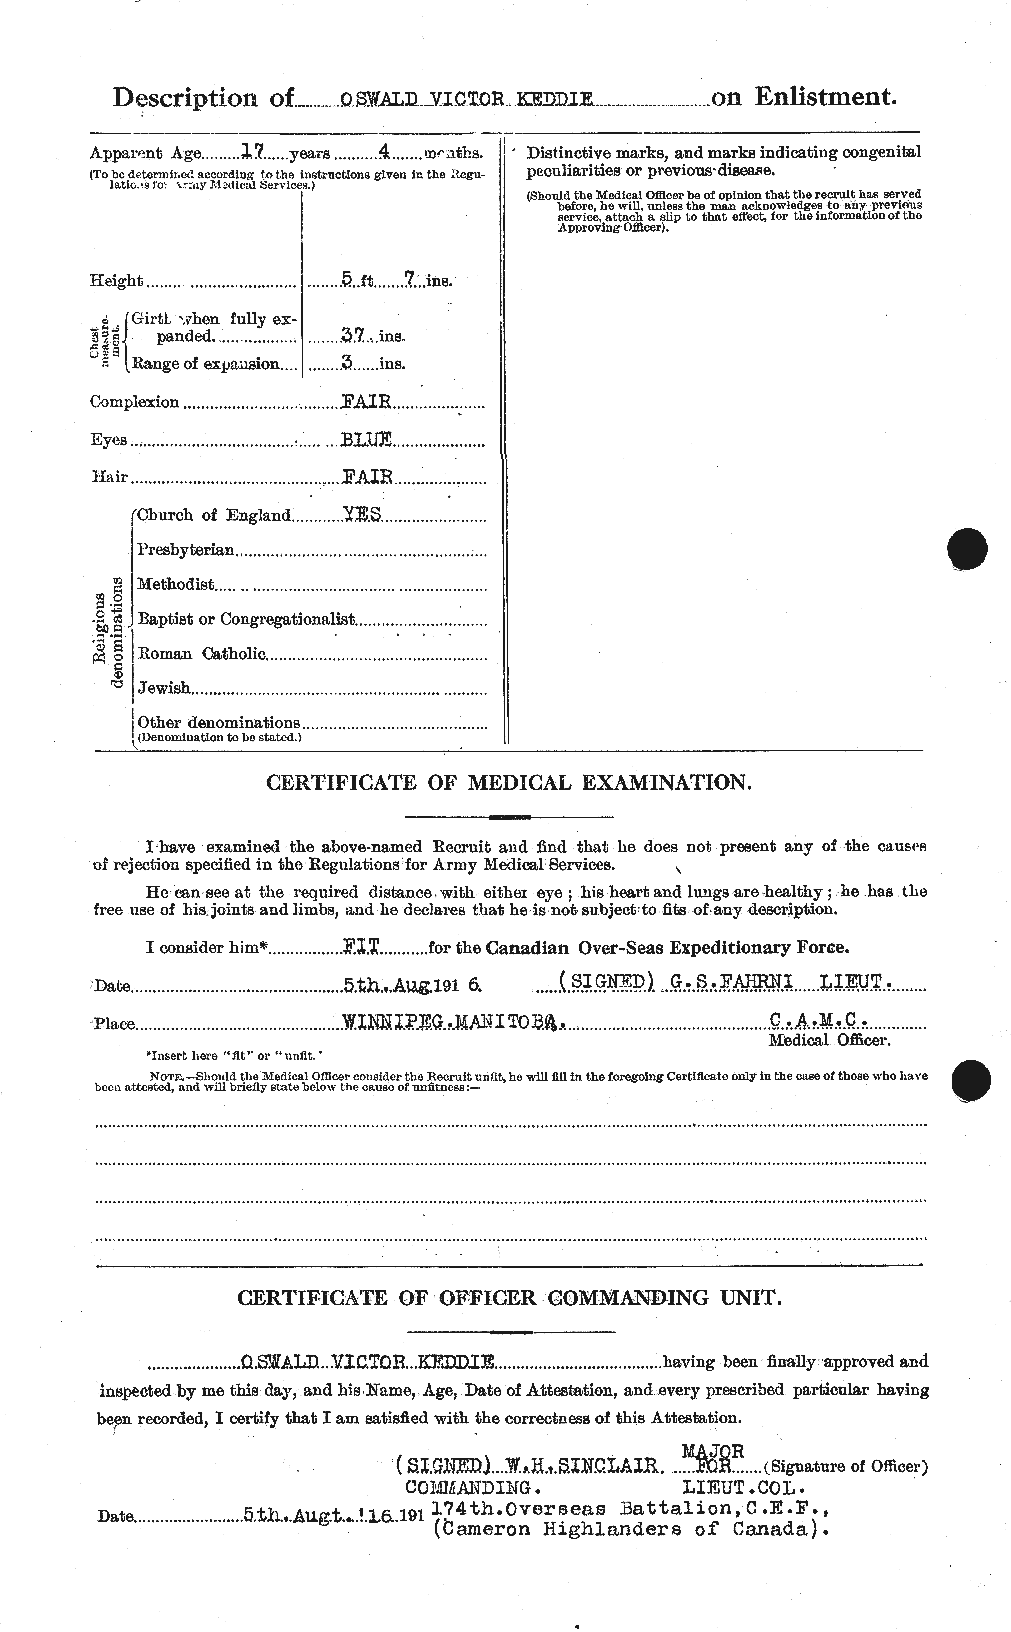 Personnel Records of the First World War - CEF 427572b